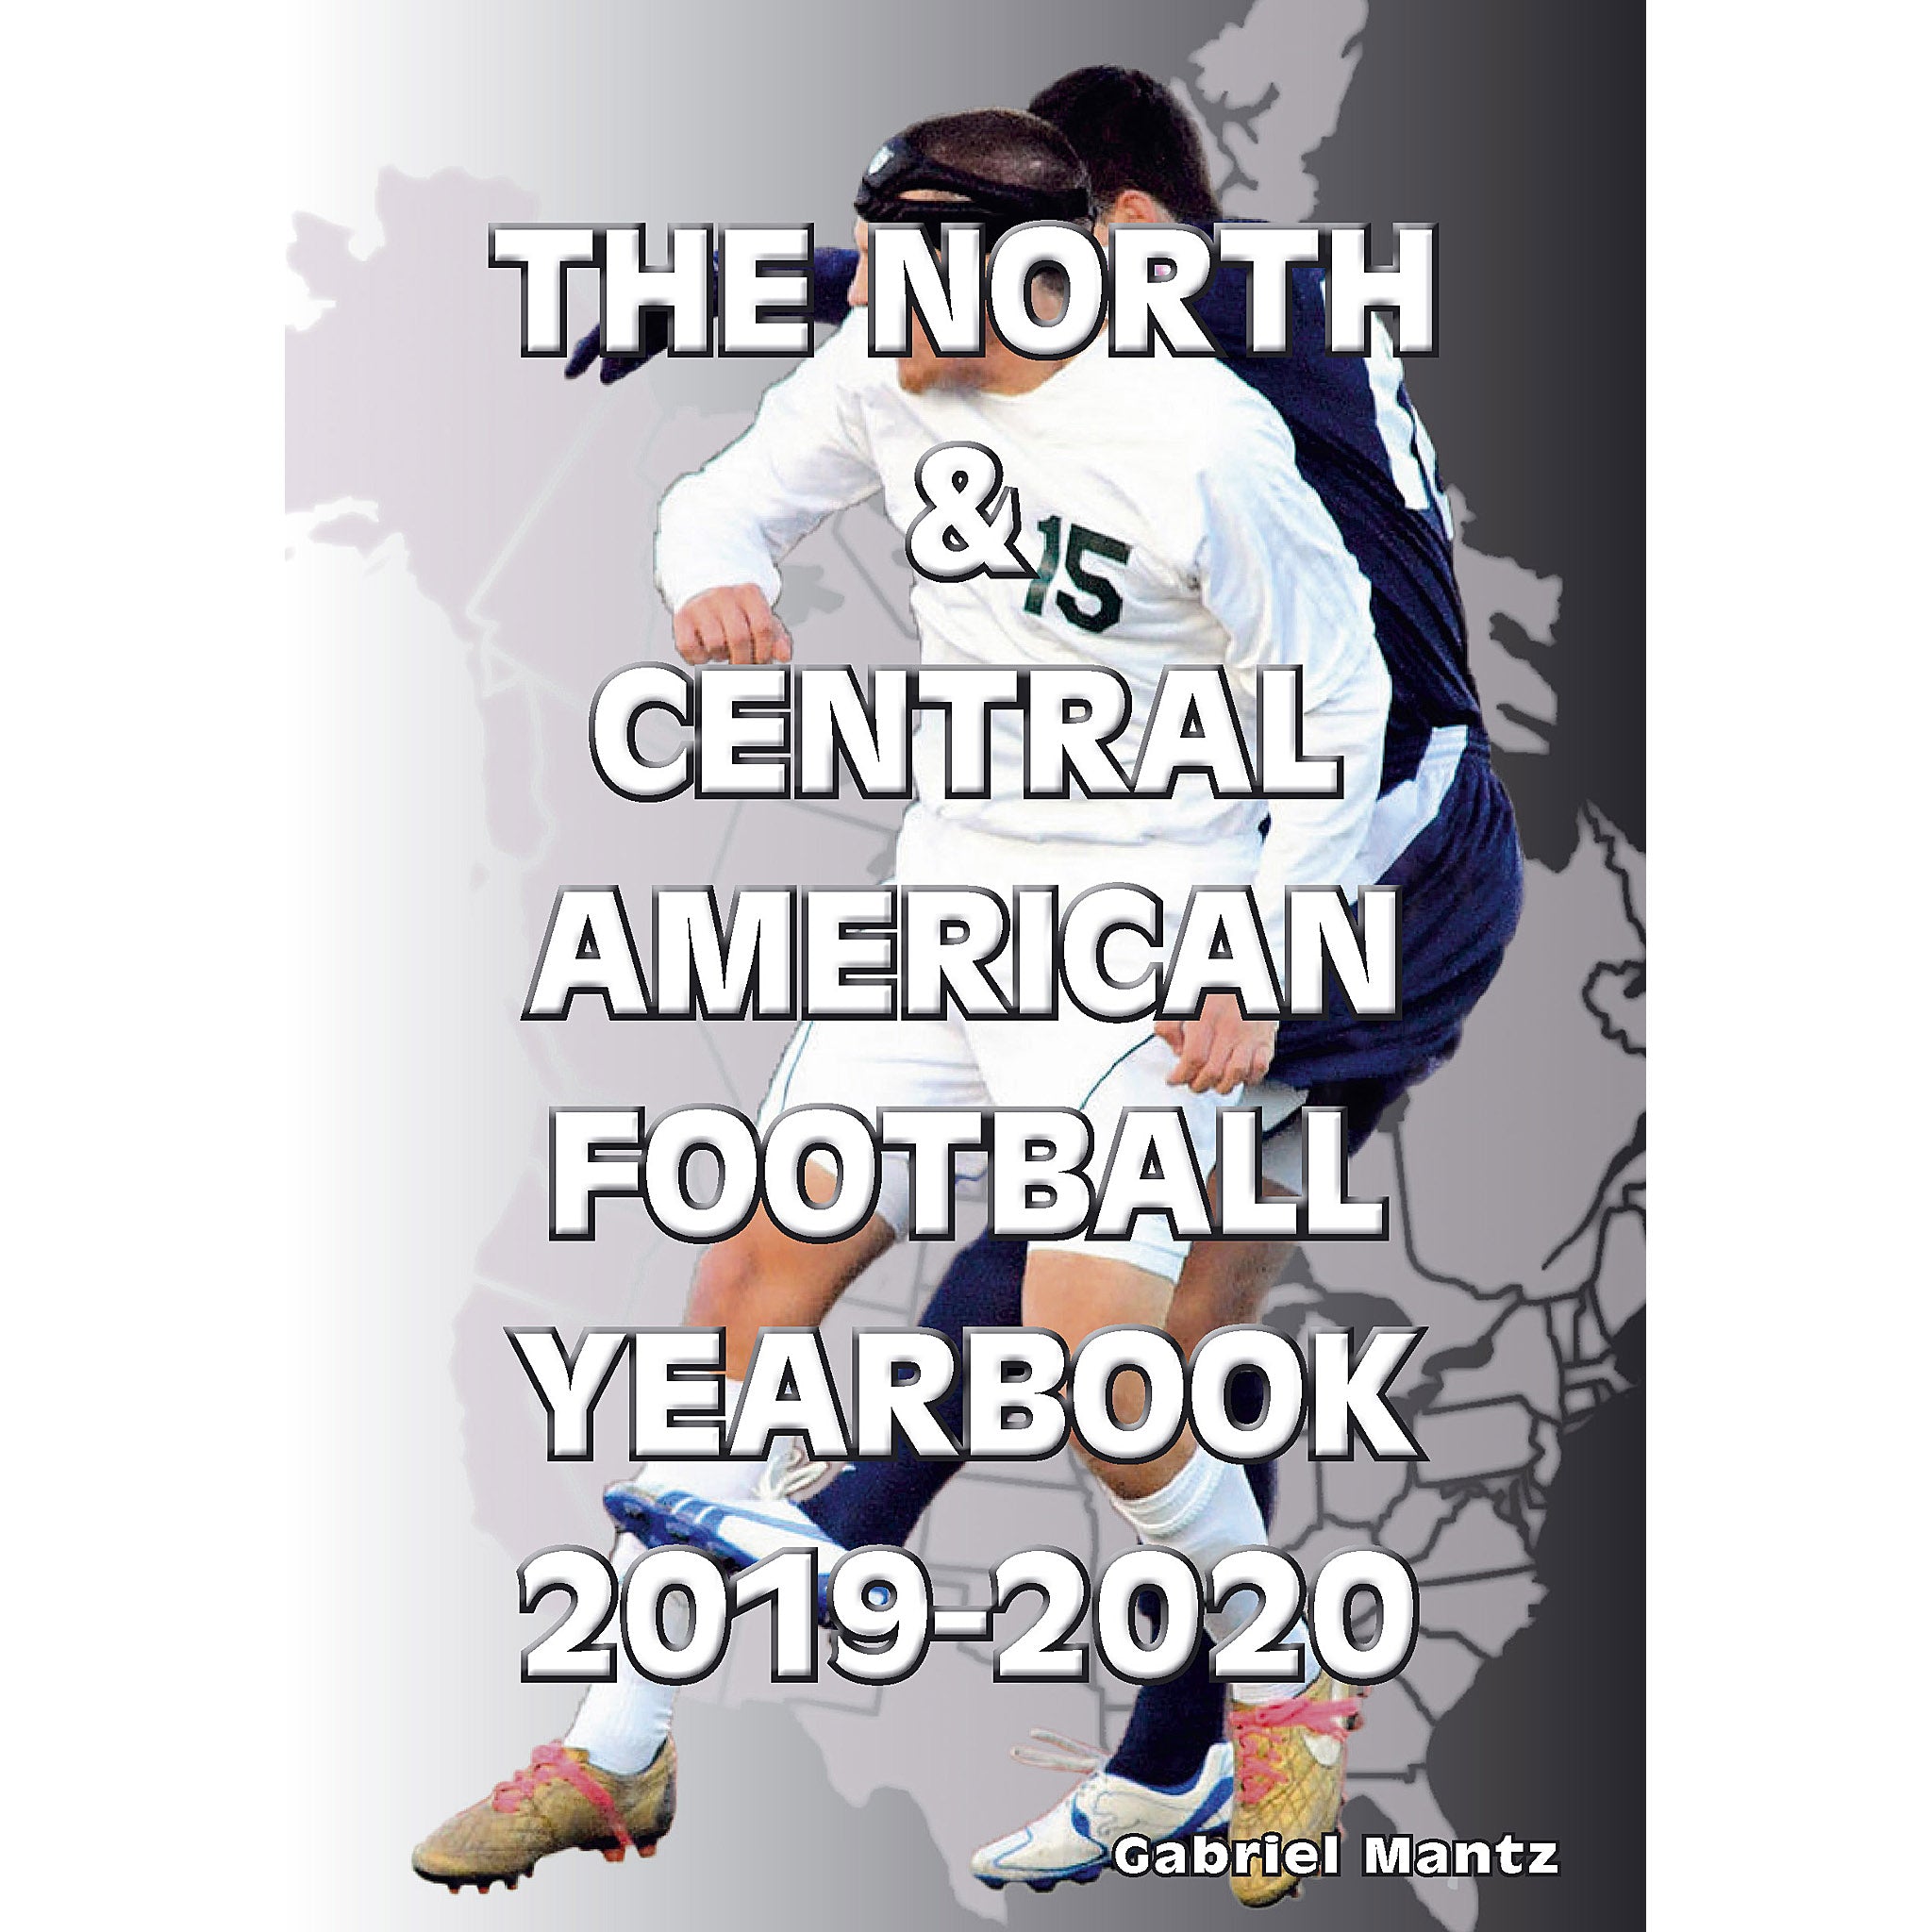 The North & Central American Football Yearbook 2019-2020